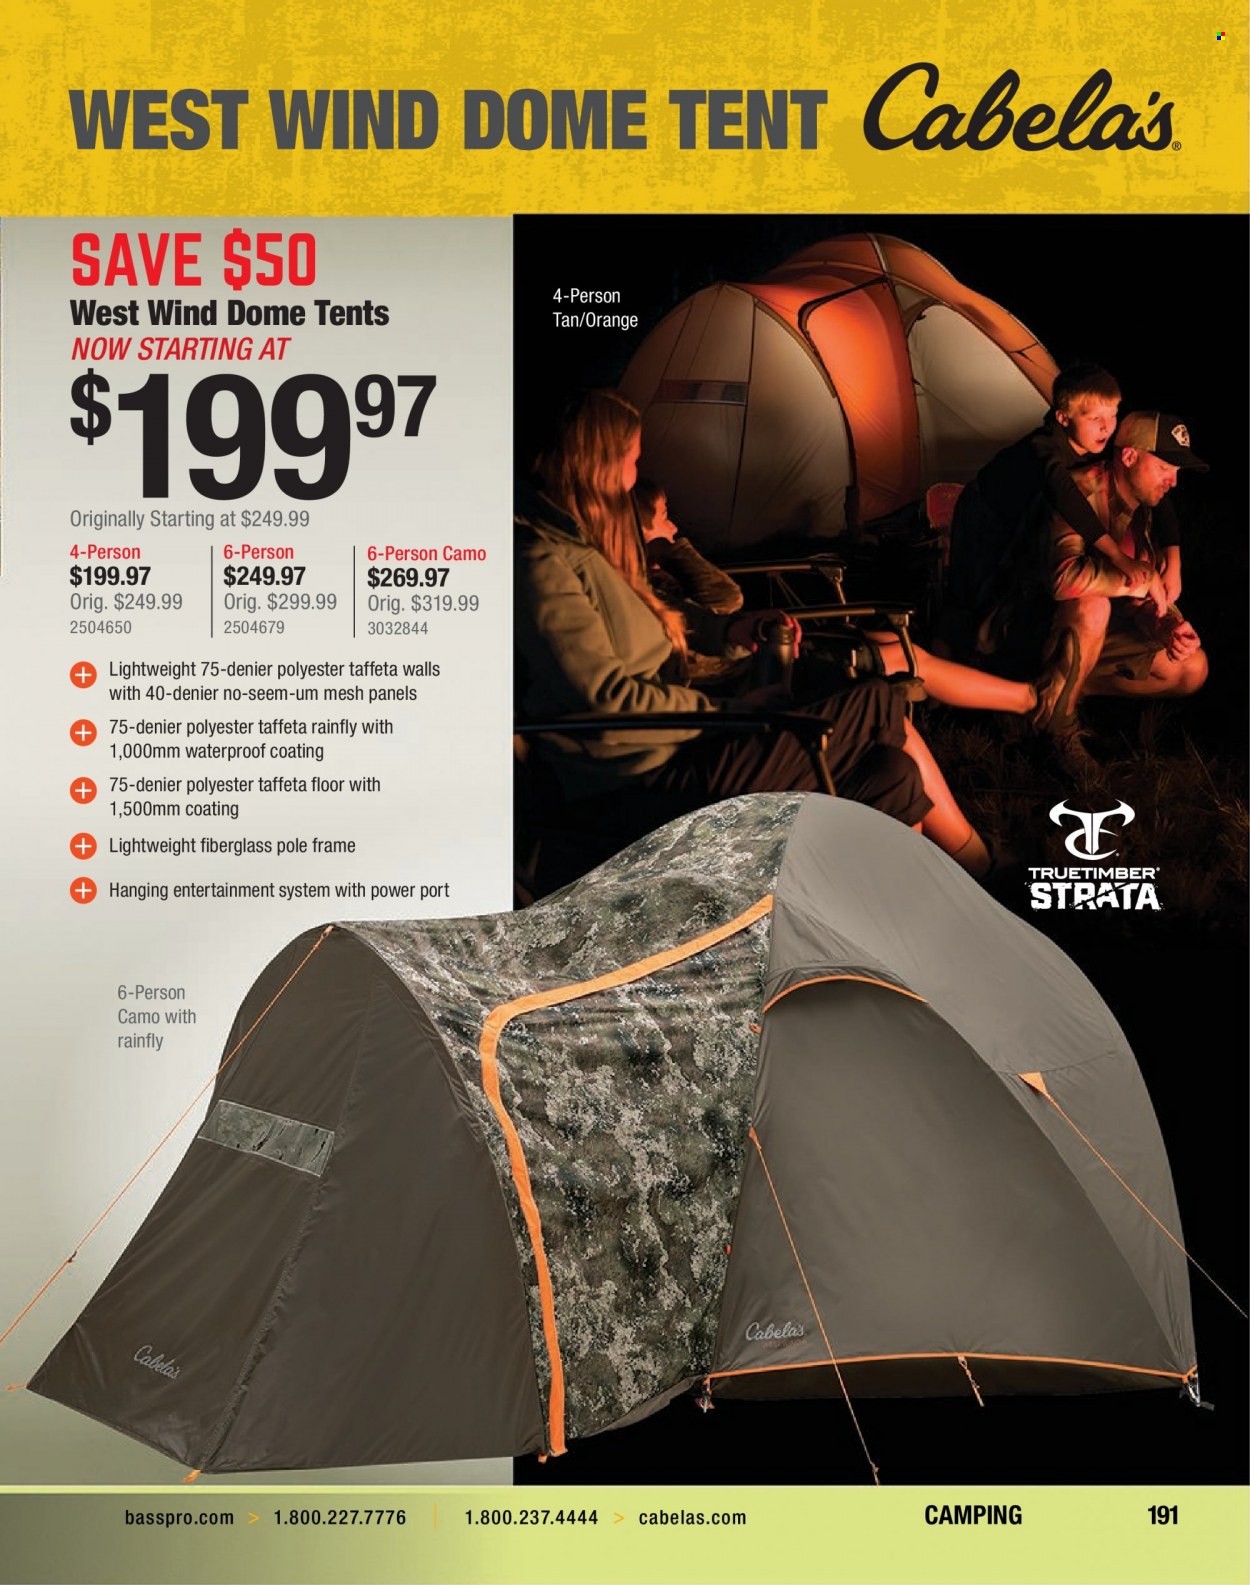 Bass Pro Shops flyer . Page 191.